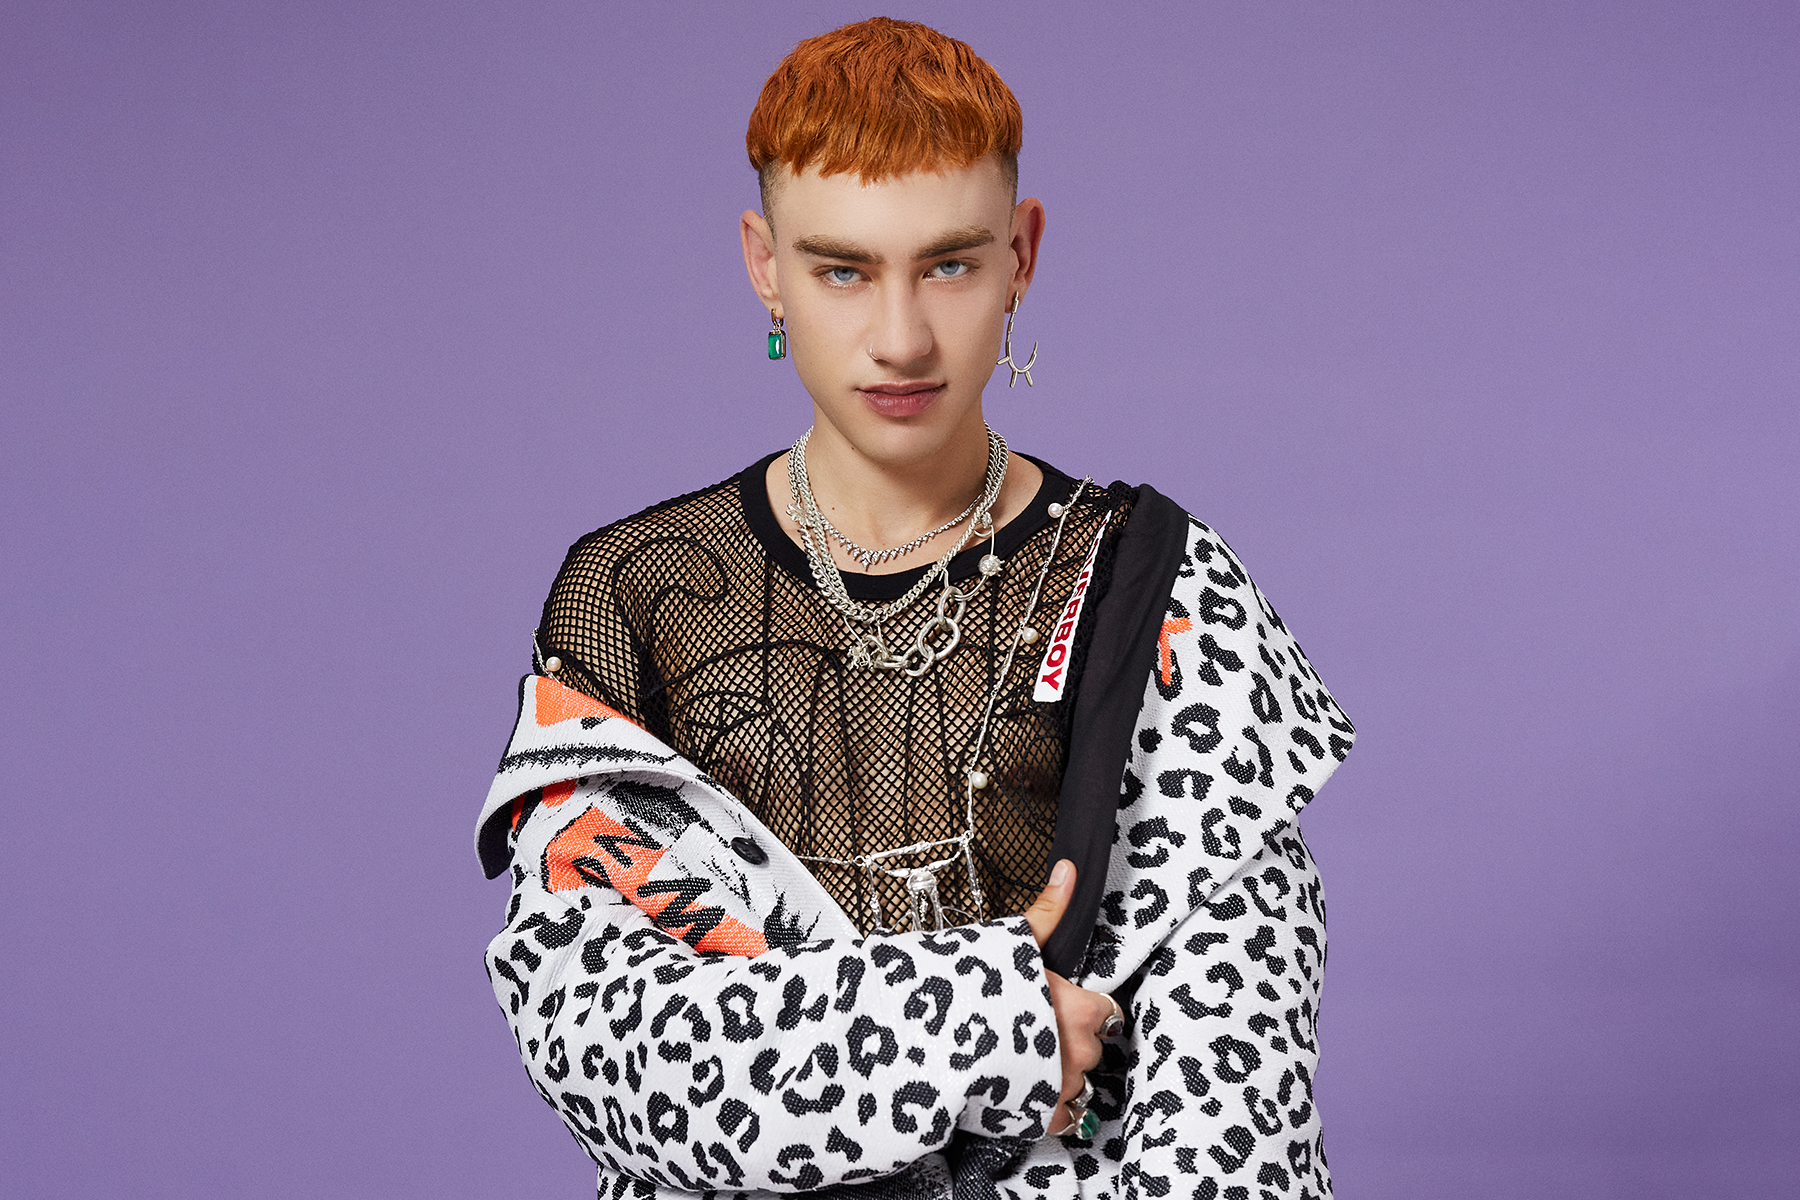 Olly Alexander Releases Years and Years Song “Sooner or later”